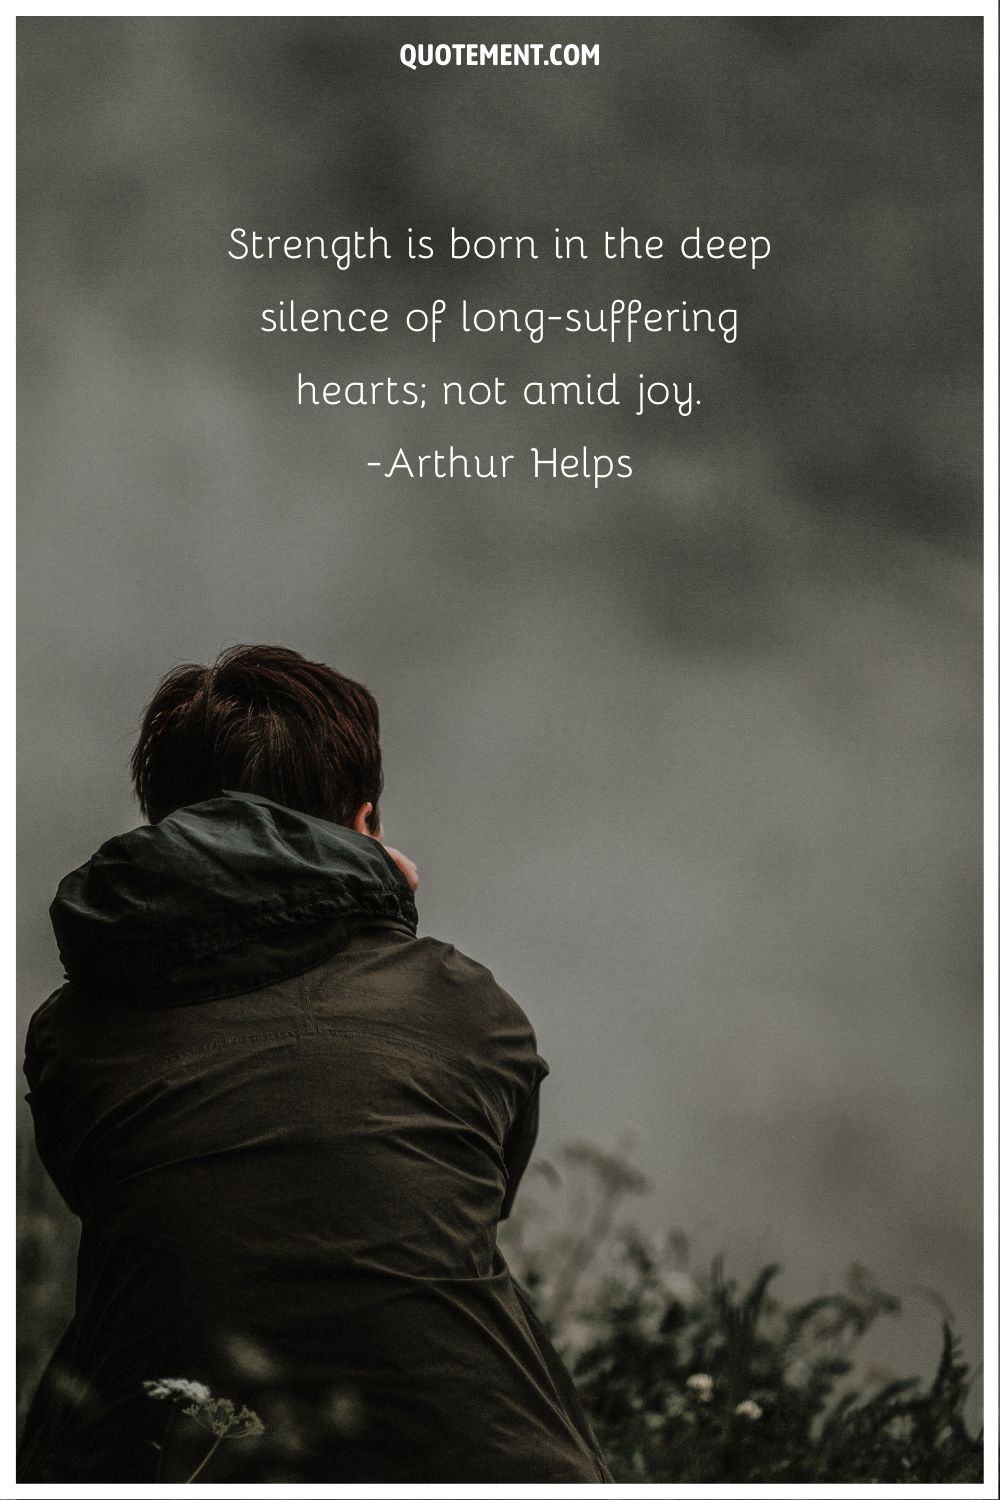 “Strength is born in the deep silence of long-suffering hearts; not amid joy.” – Arthur Helps